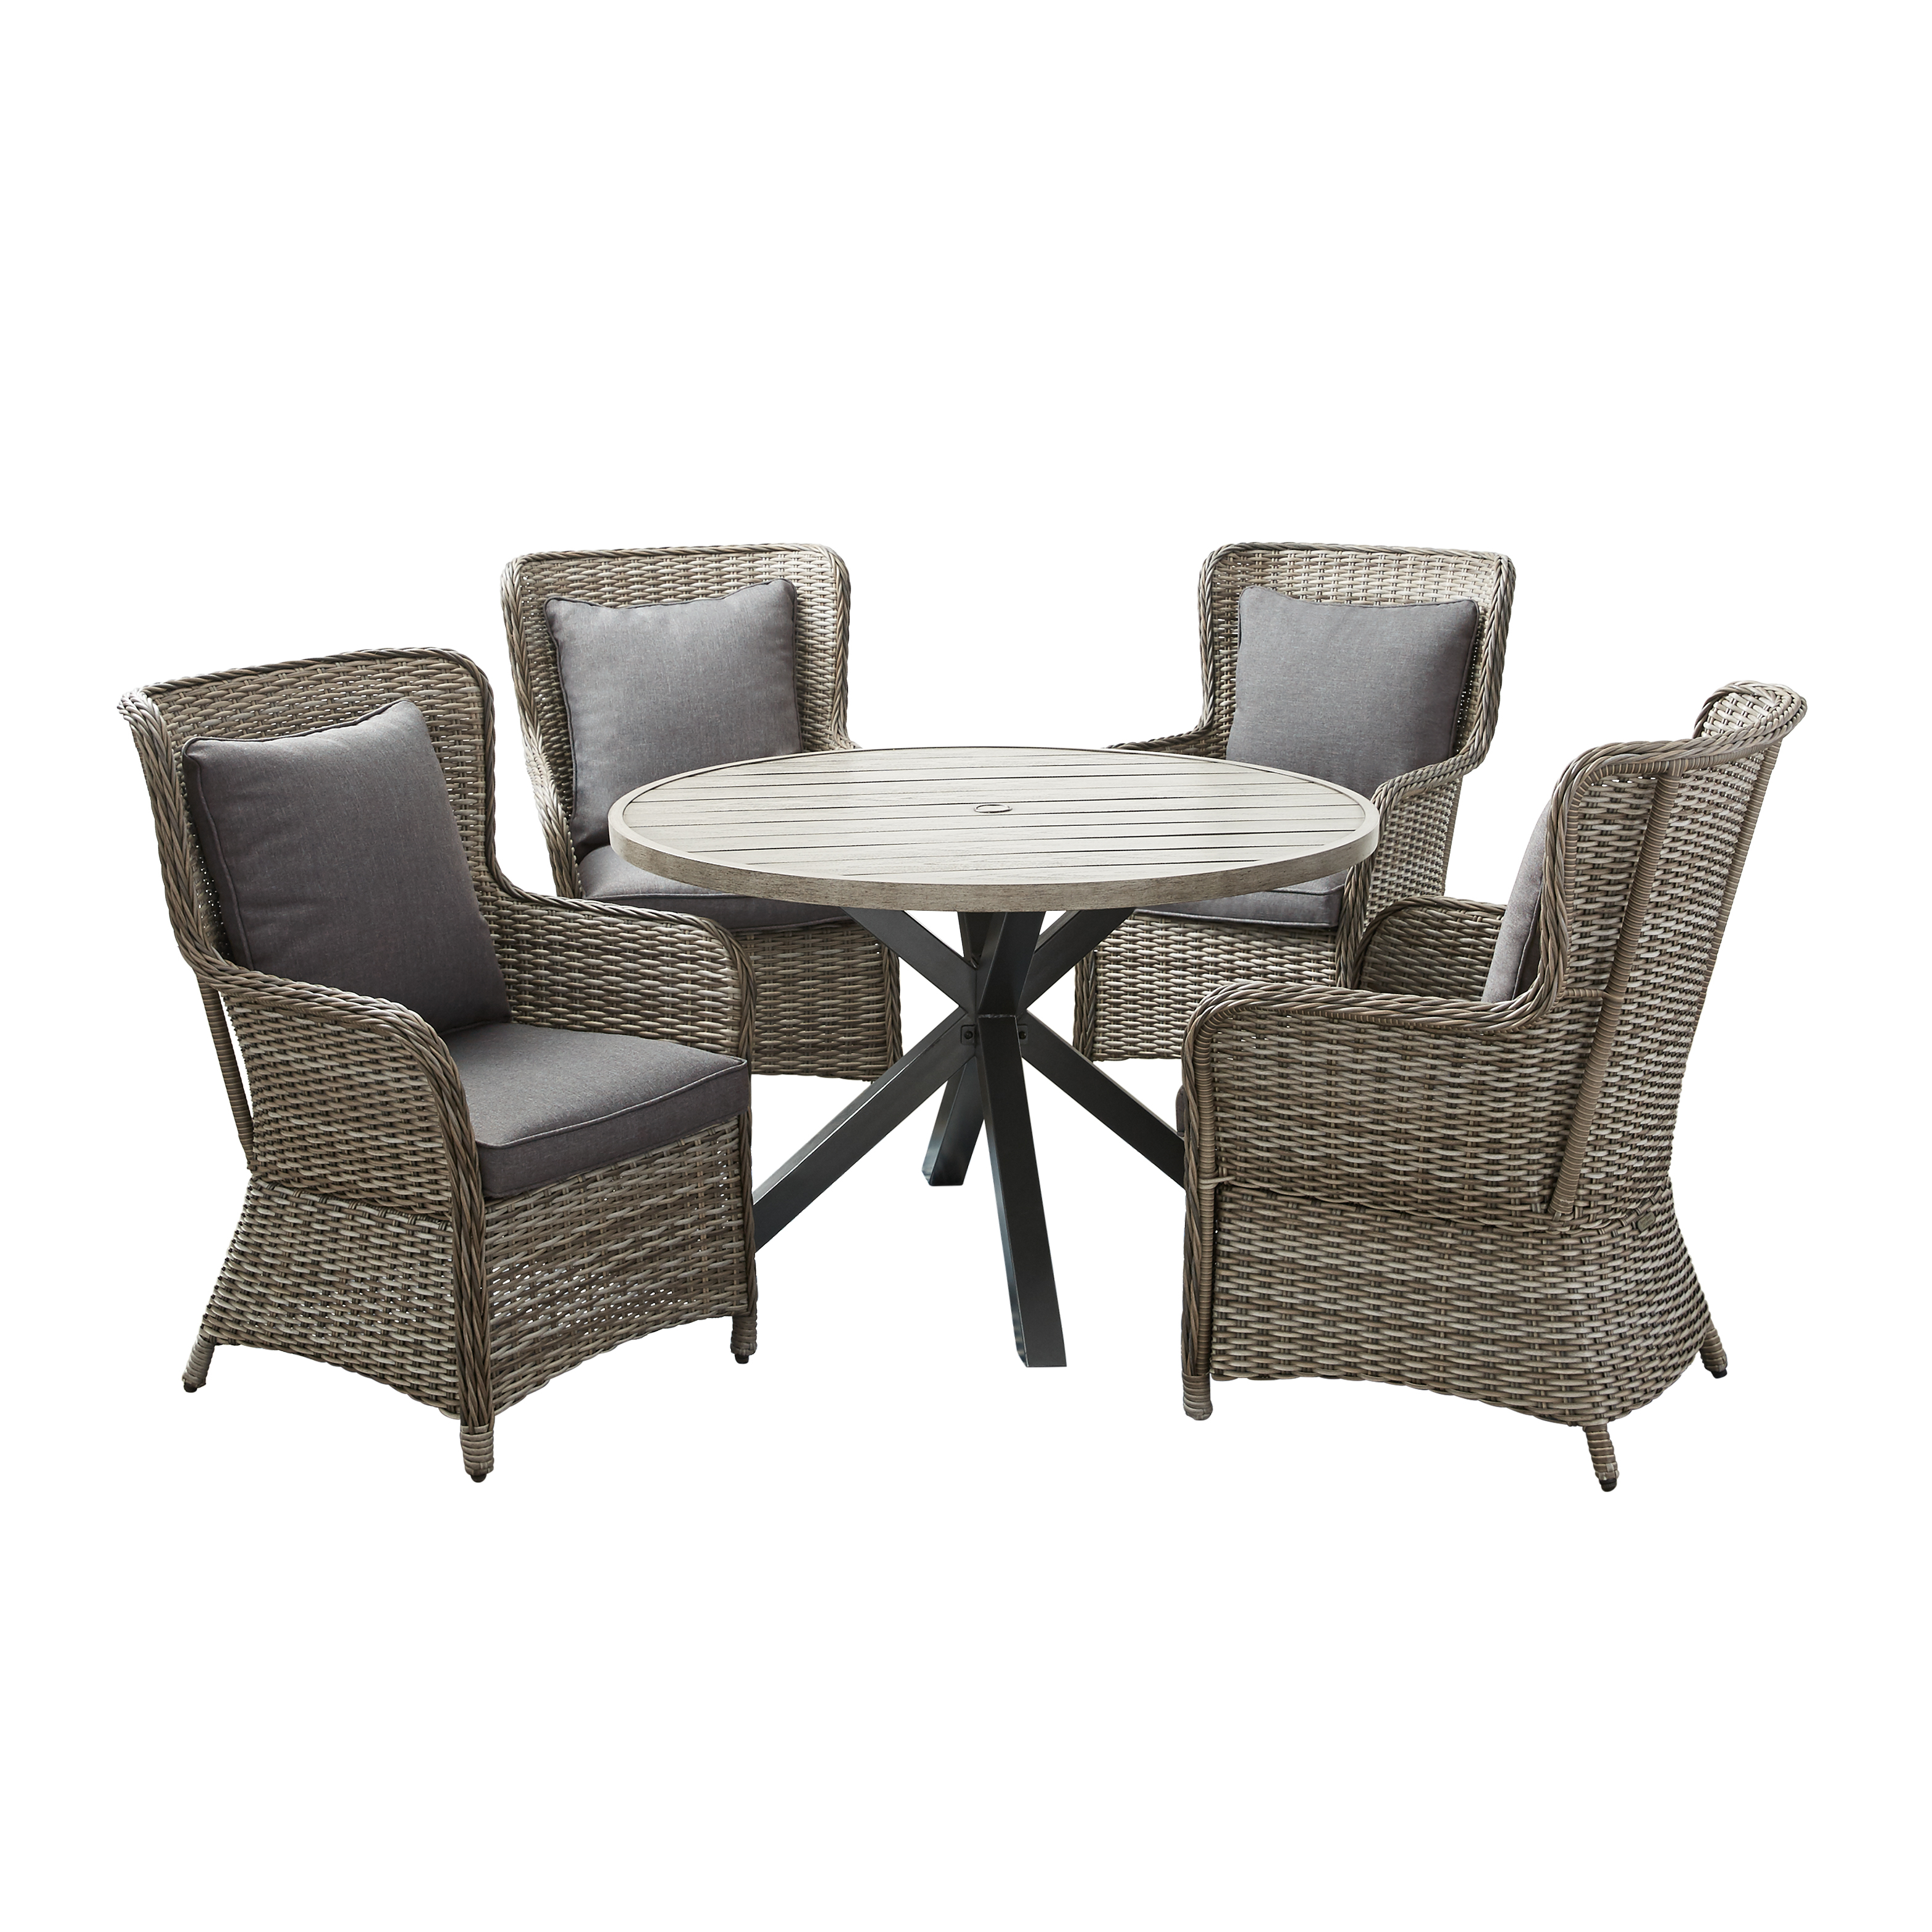 Grey Wicker Outdoor Dining Set Budapestsightseeing intended for proportions 3137 X 3137